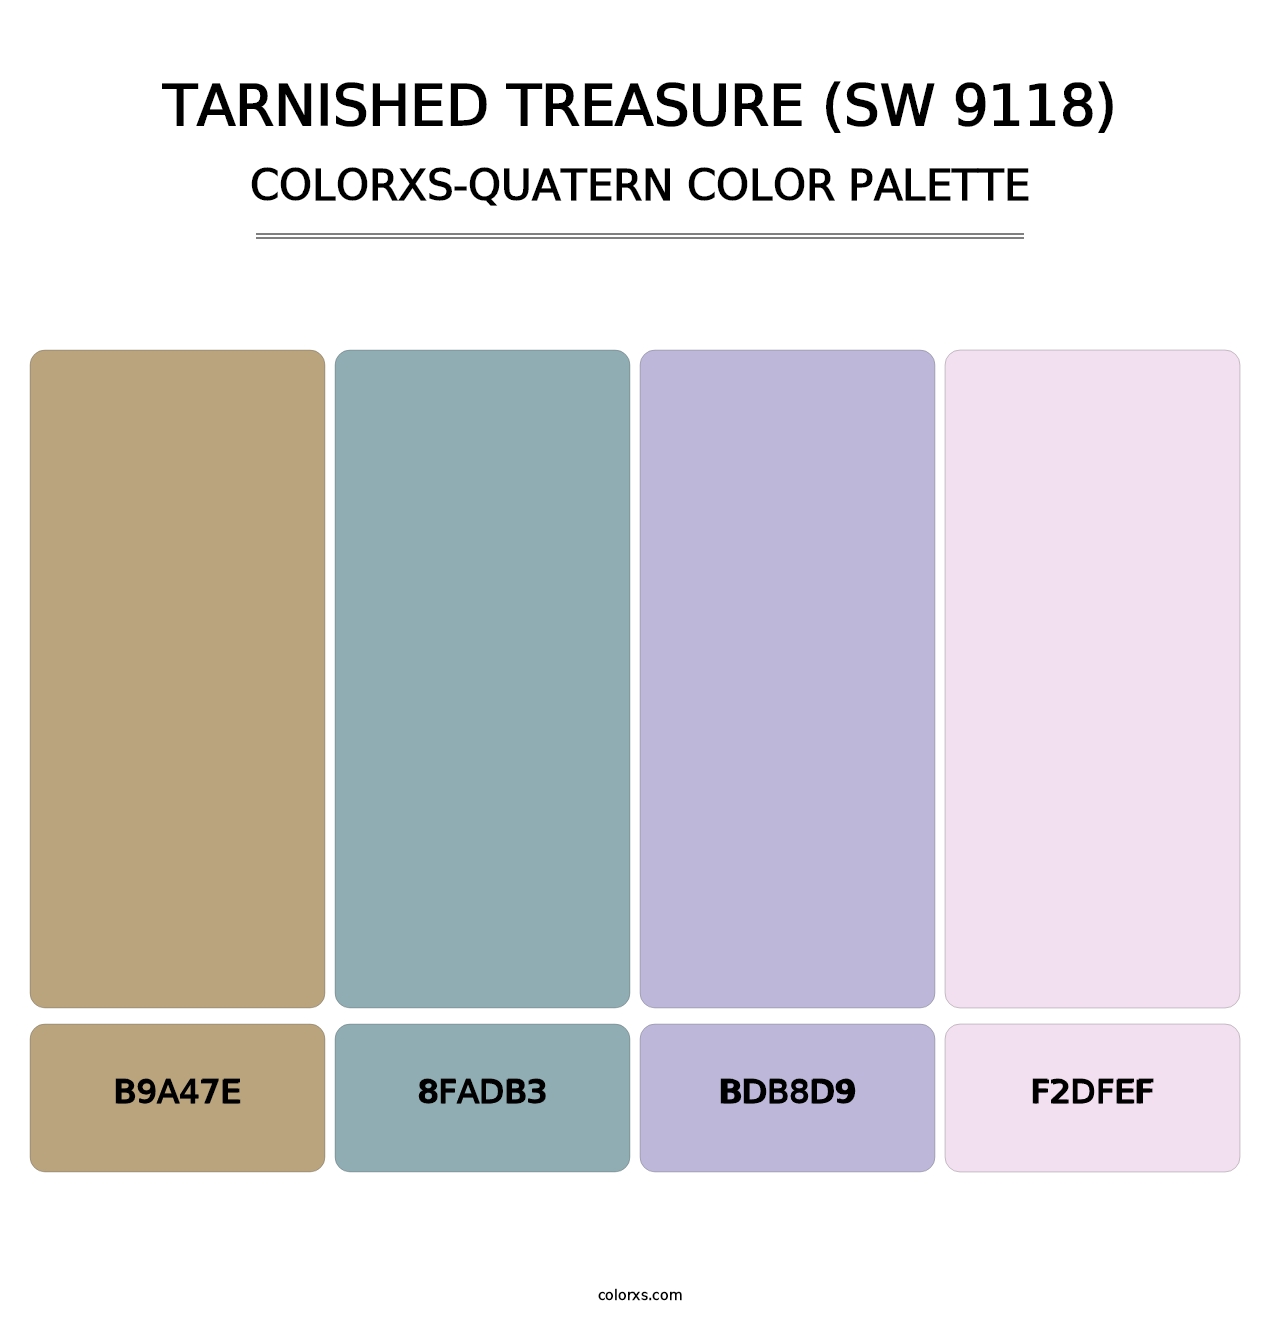 Tarnished Treasure (SW 9118) - Colorxs Quatern Palette